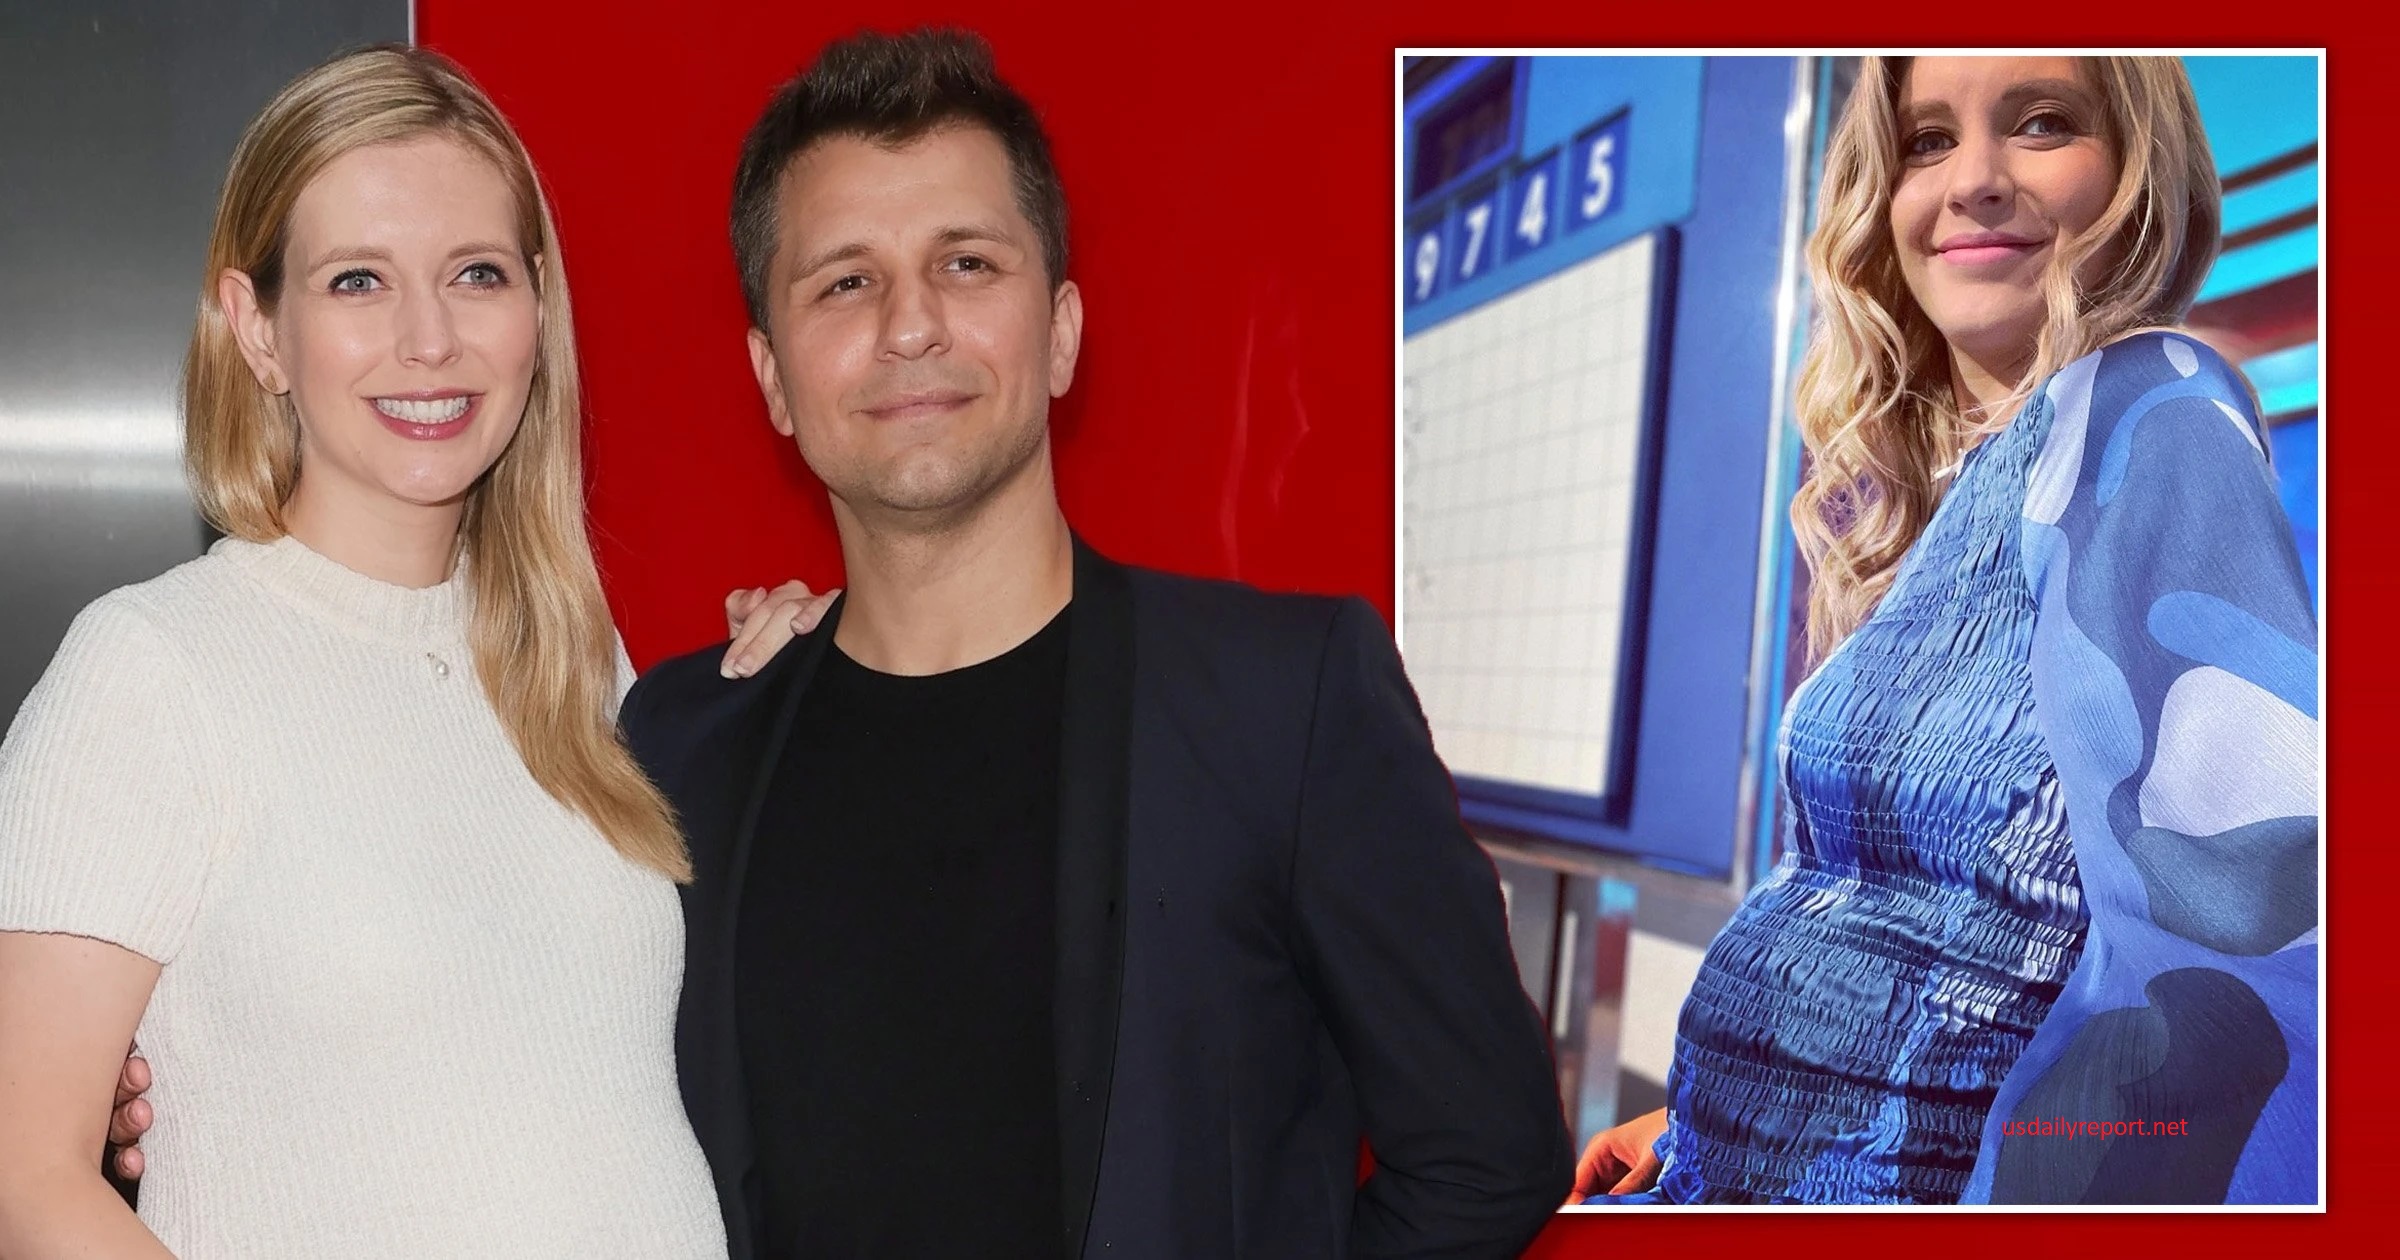 The momentous occasion comes just 2 weeks since Rachel Riley and Pasha have celebrated their third anniversary as husband and wife. Sharing a previously unseen picture from their weddingday, Rachel wrote: